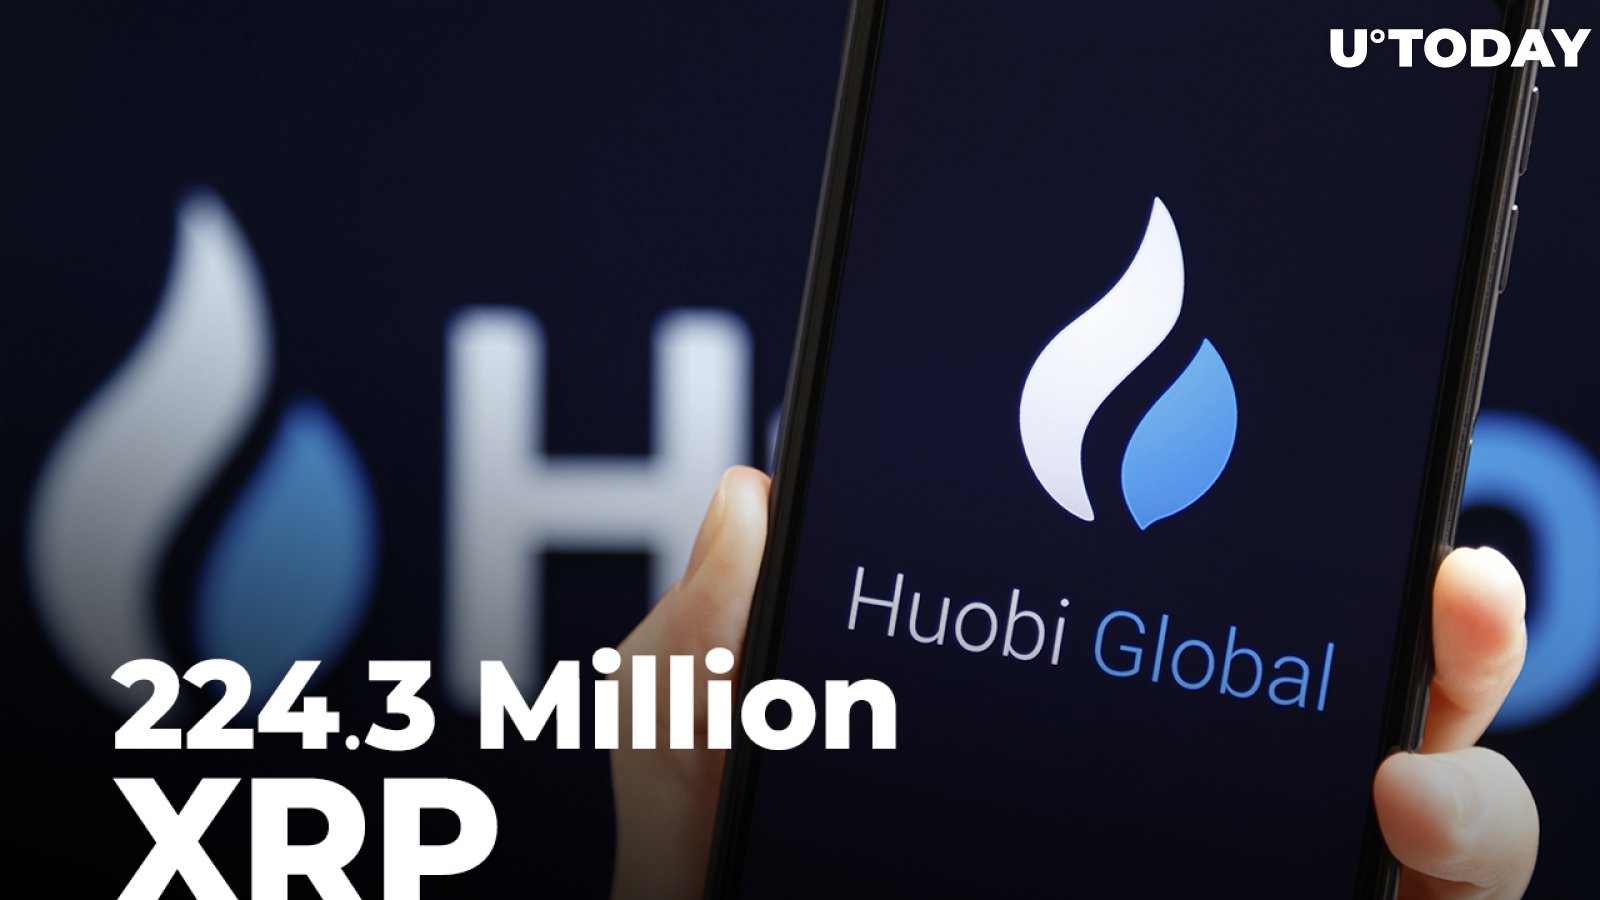 224.3 Million XRP Wired, 1/3 of That Moved by Ripple to Huobi